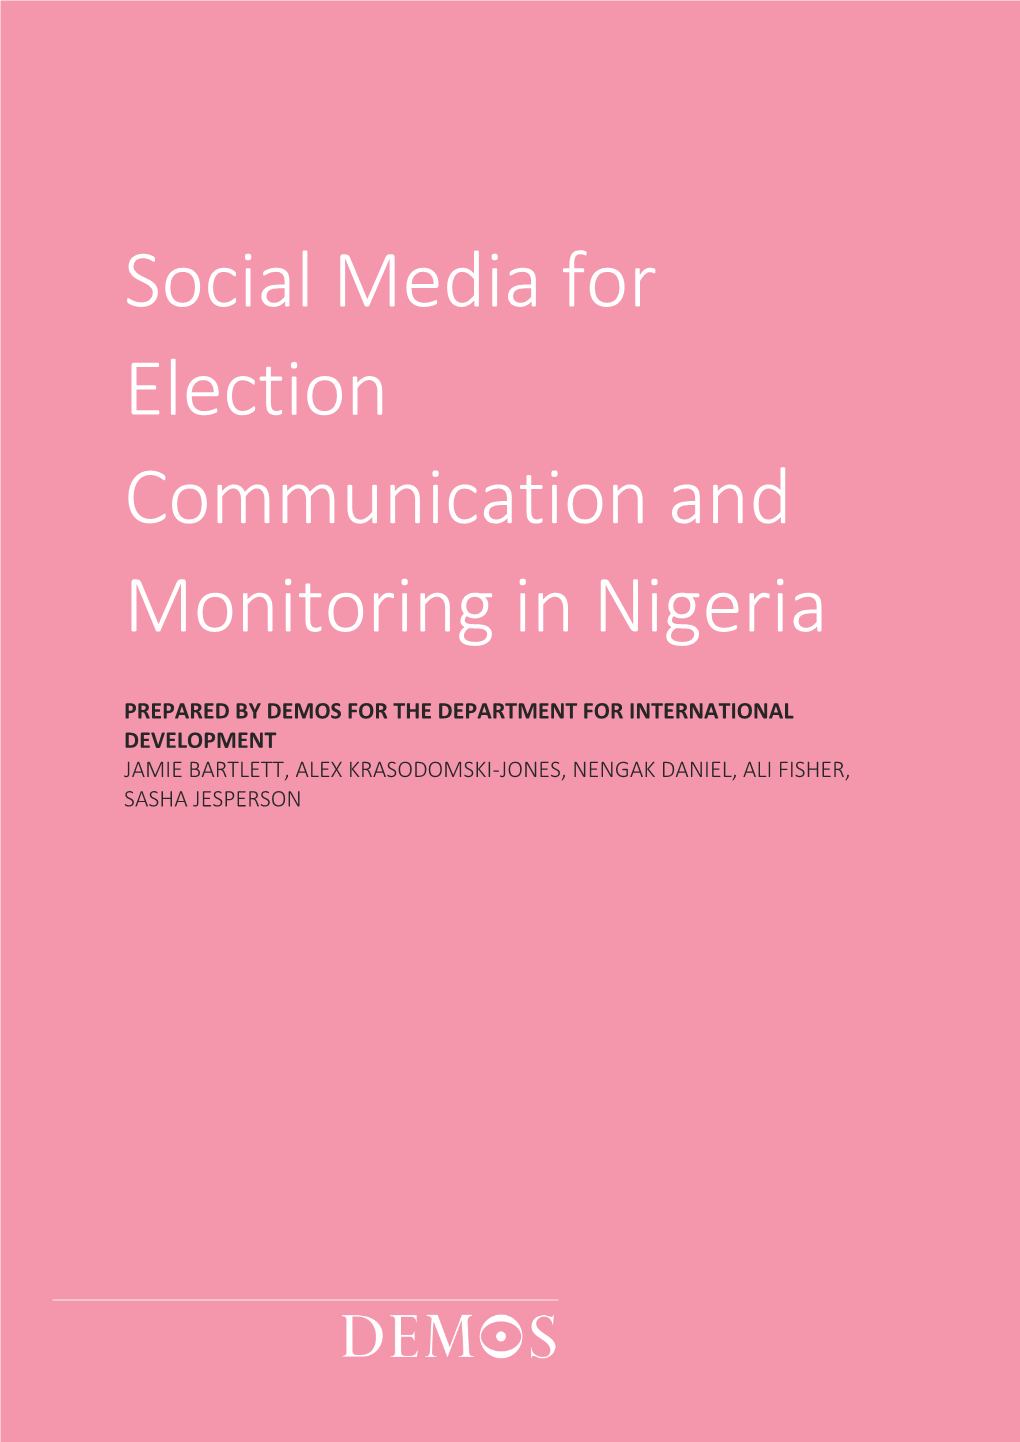 Social Media for Election Communication and Monitoring in Nigeria